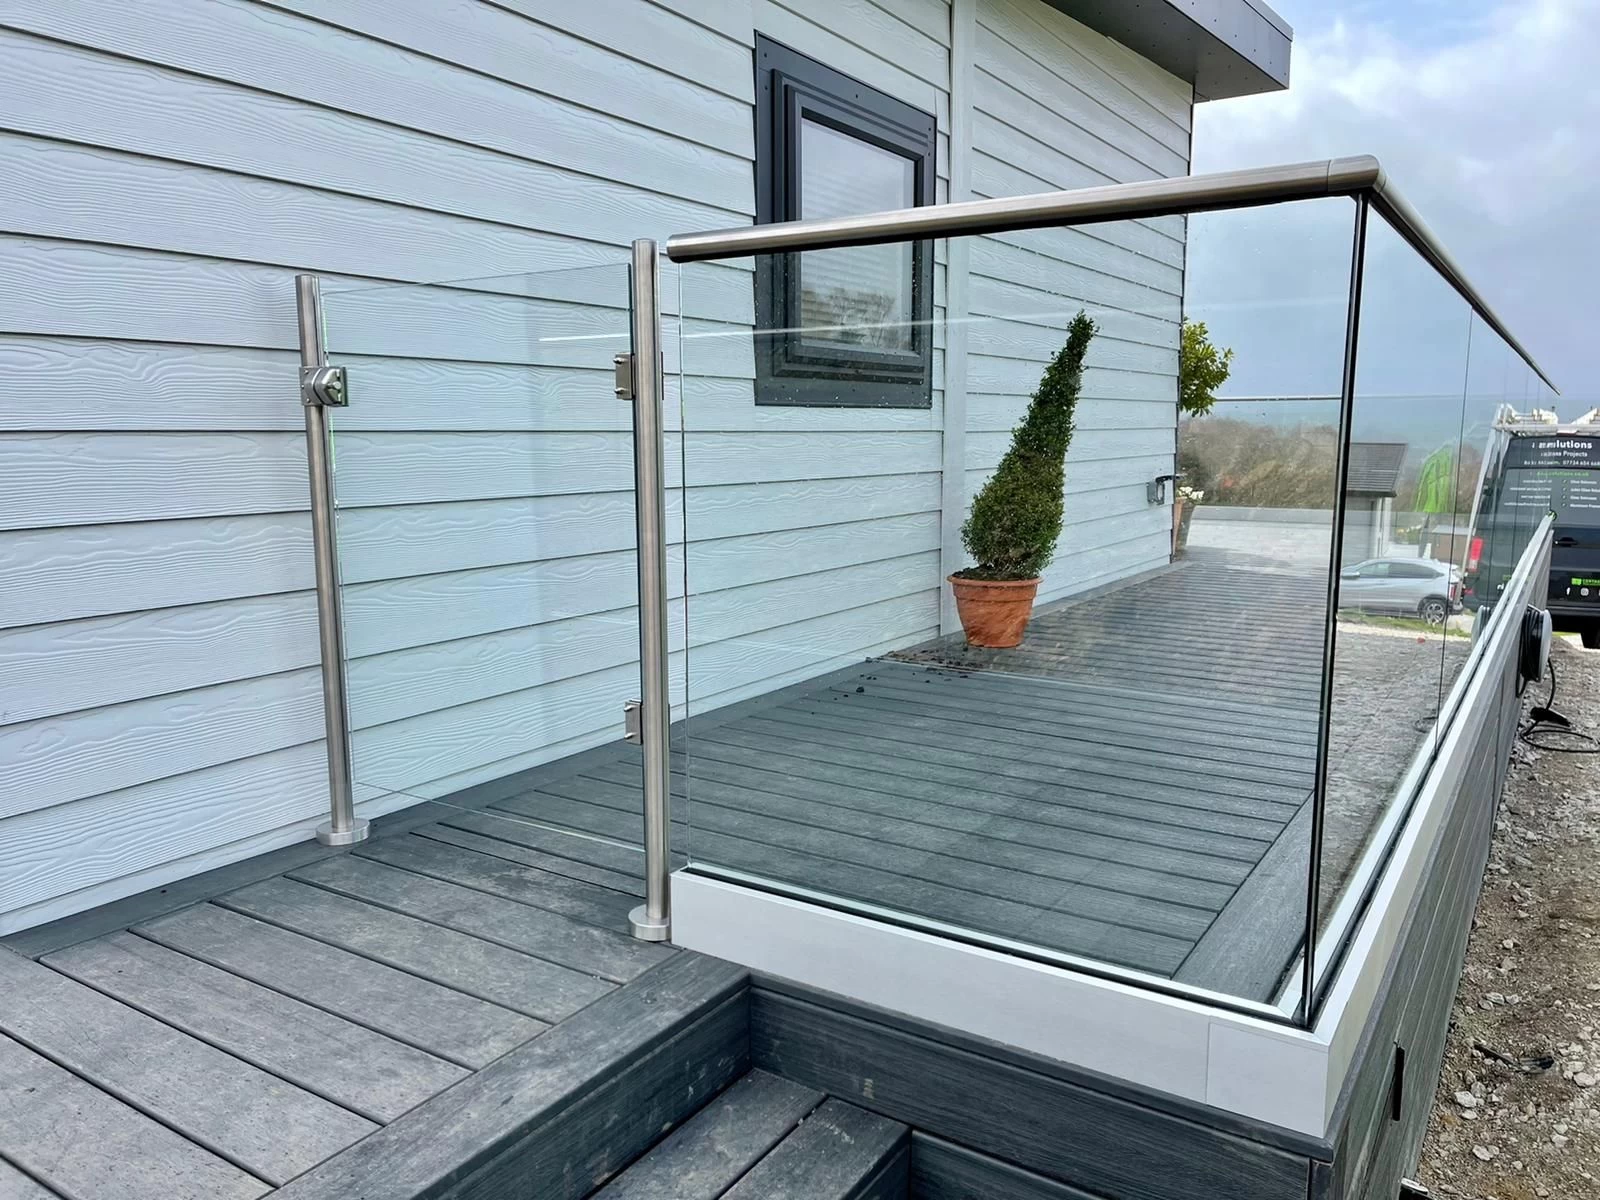 Pet Child friendly Glass Balustrade Patio Deck Railings With Glass Door Hinges